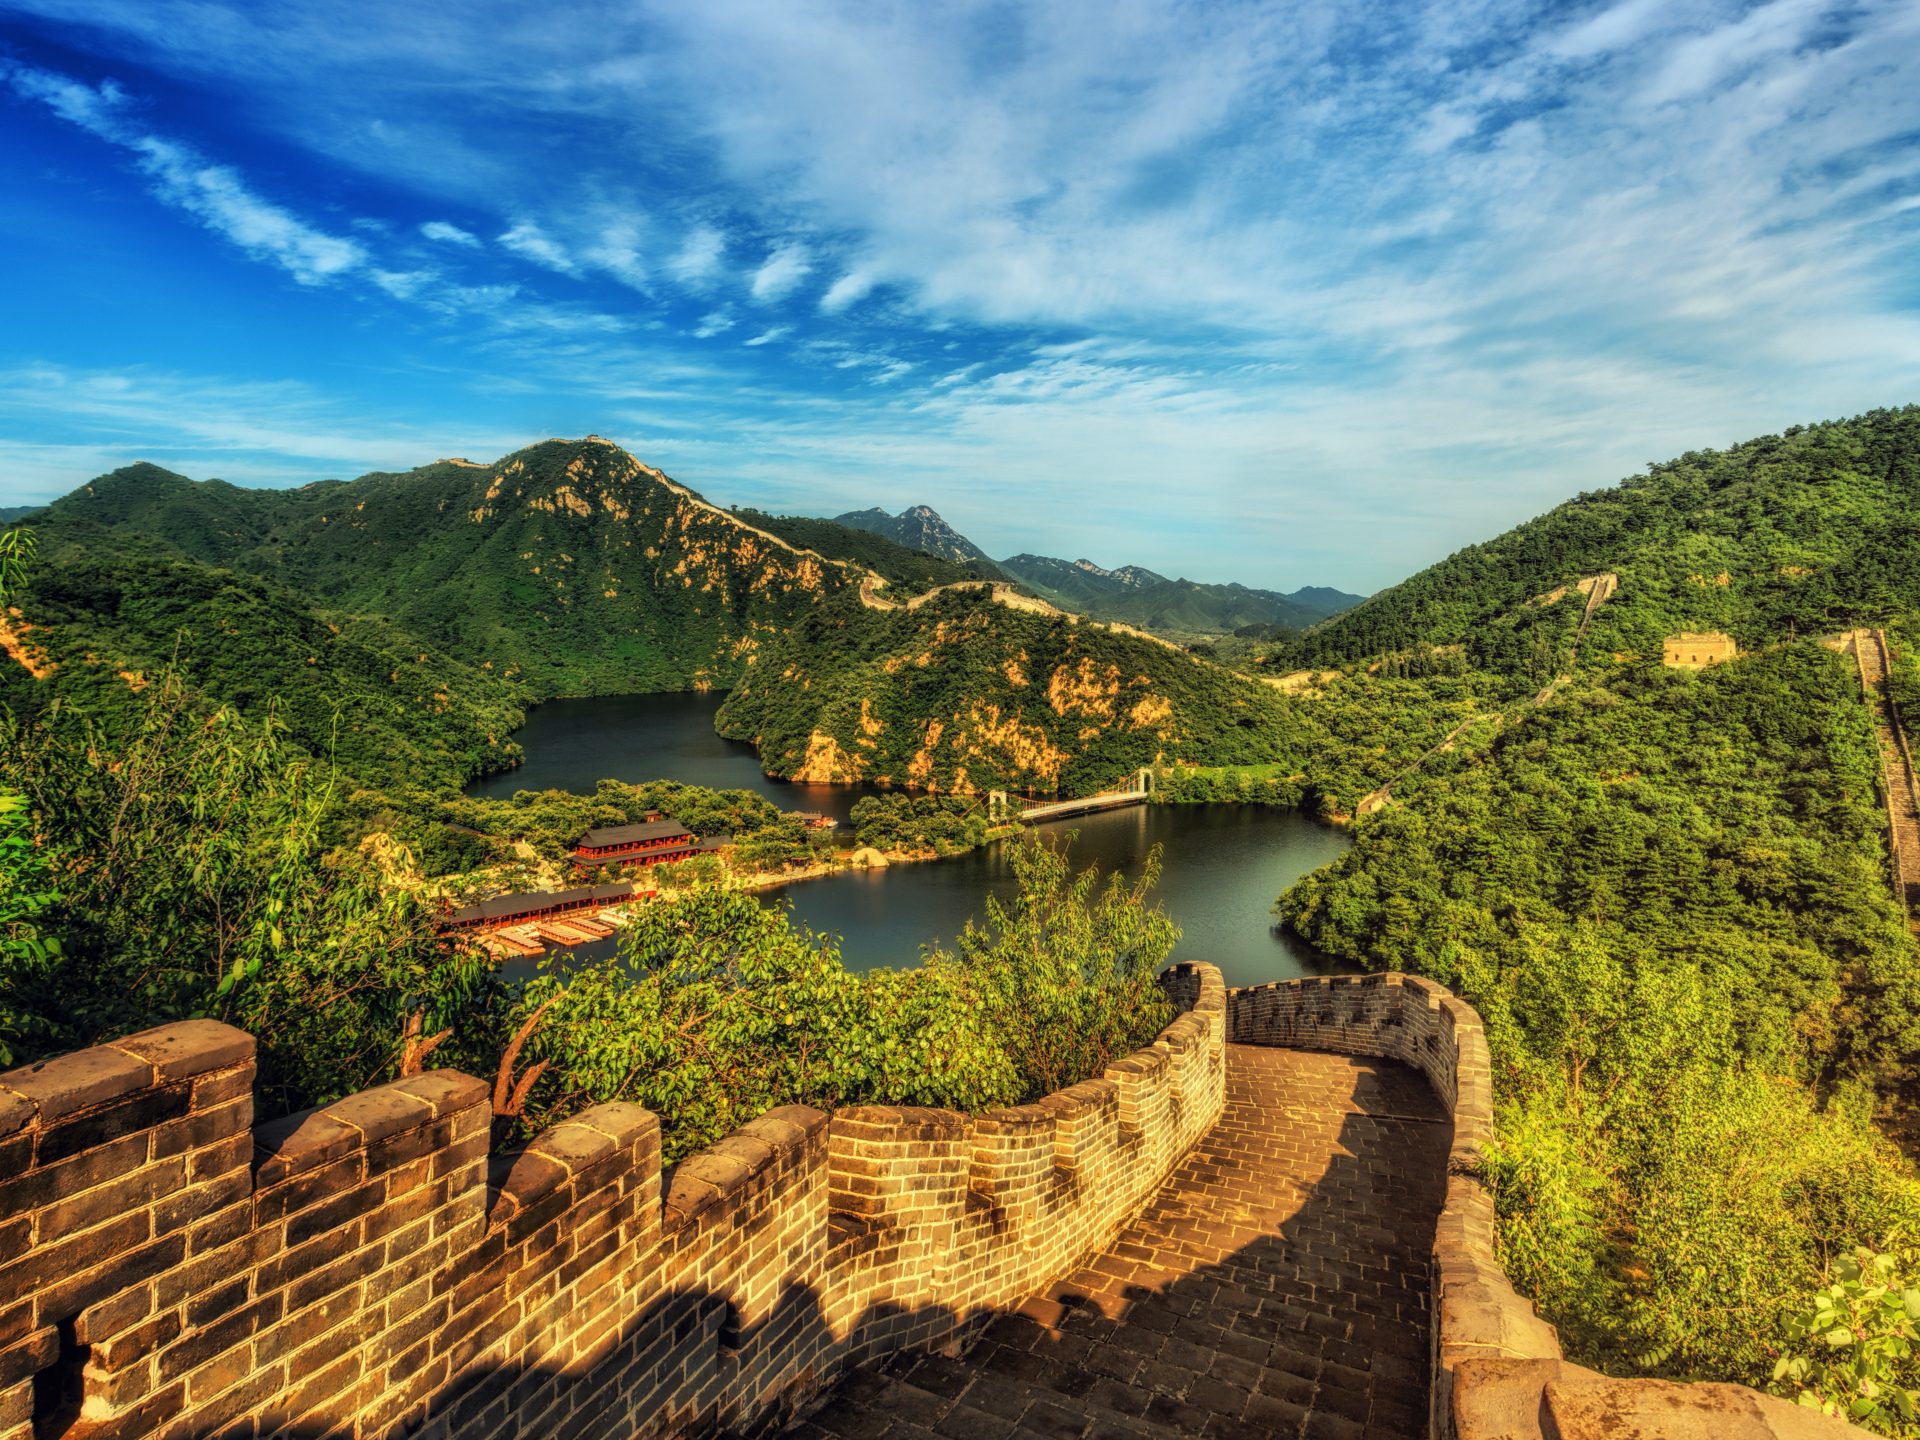 Historical Place In Beijing, China Great Wall Of China 4k Ultra HD Wallpaper For Desktop Laptop Tablet Mobile Phones And Tv 6000x3375, Wallpaper13.com